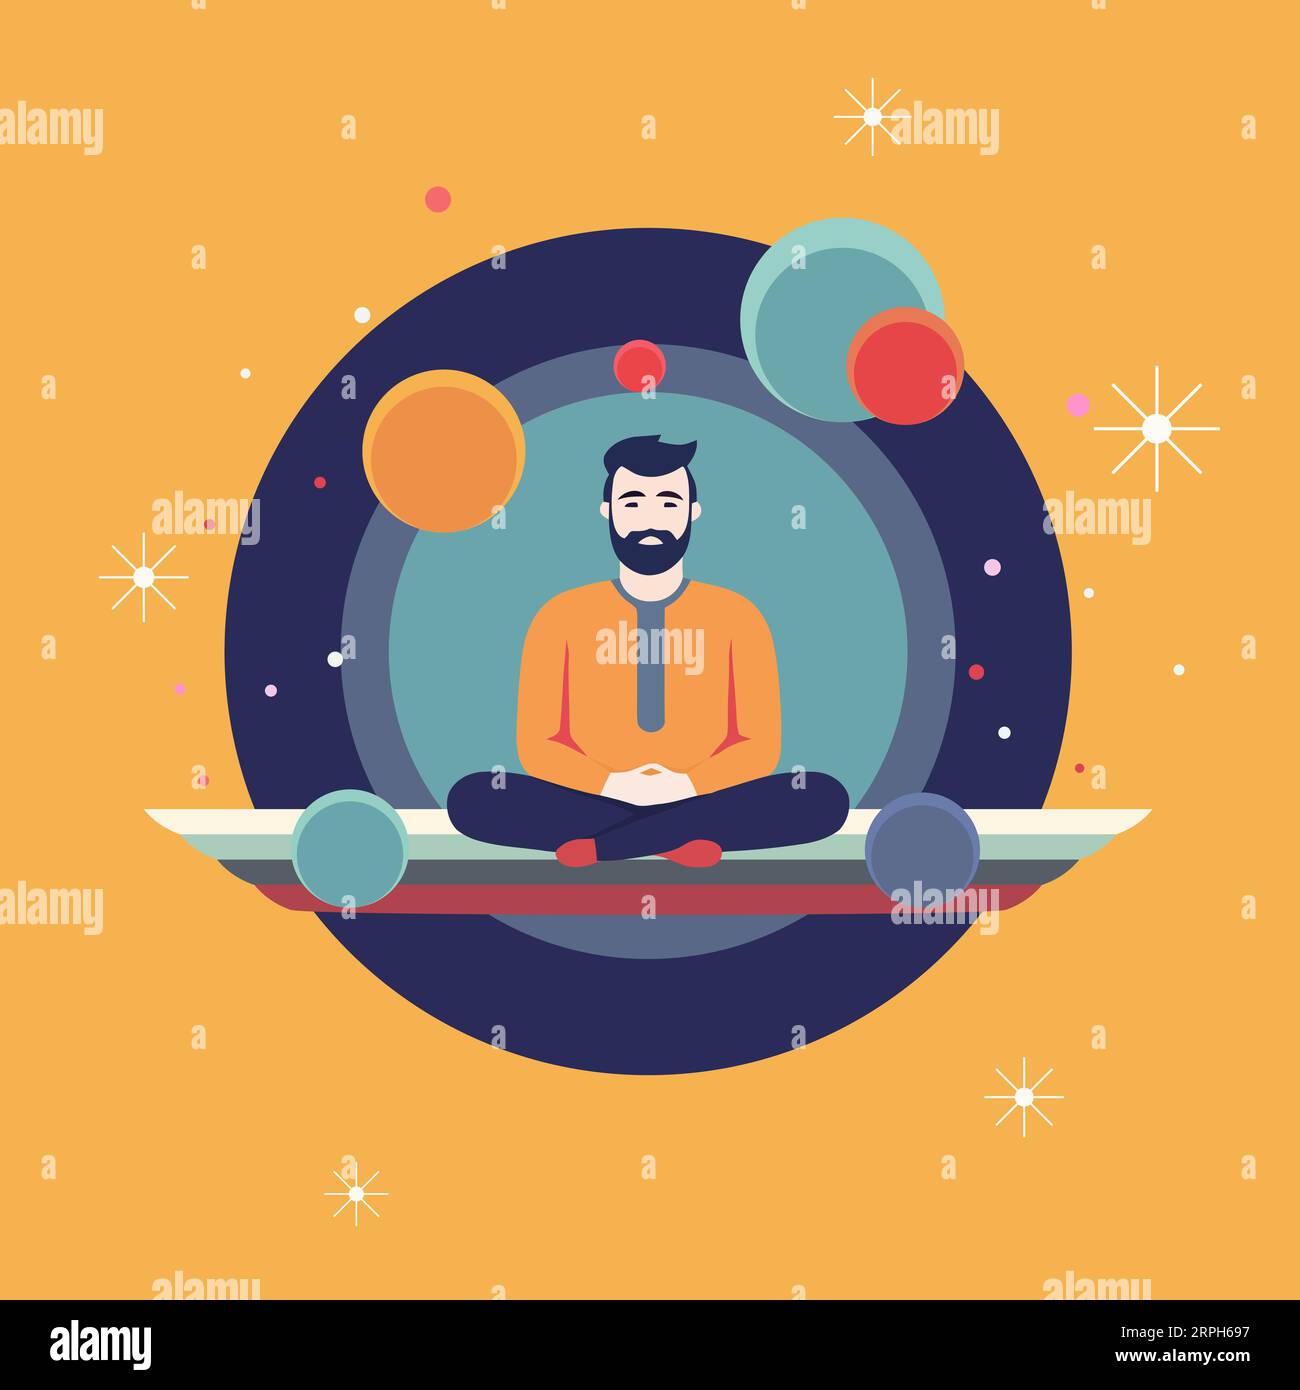 Man with beard in Yoga lotus pose, concept art, minimalist flat design, isolated from background, creative vector illustration. Stock Vector